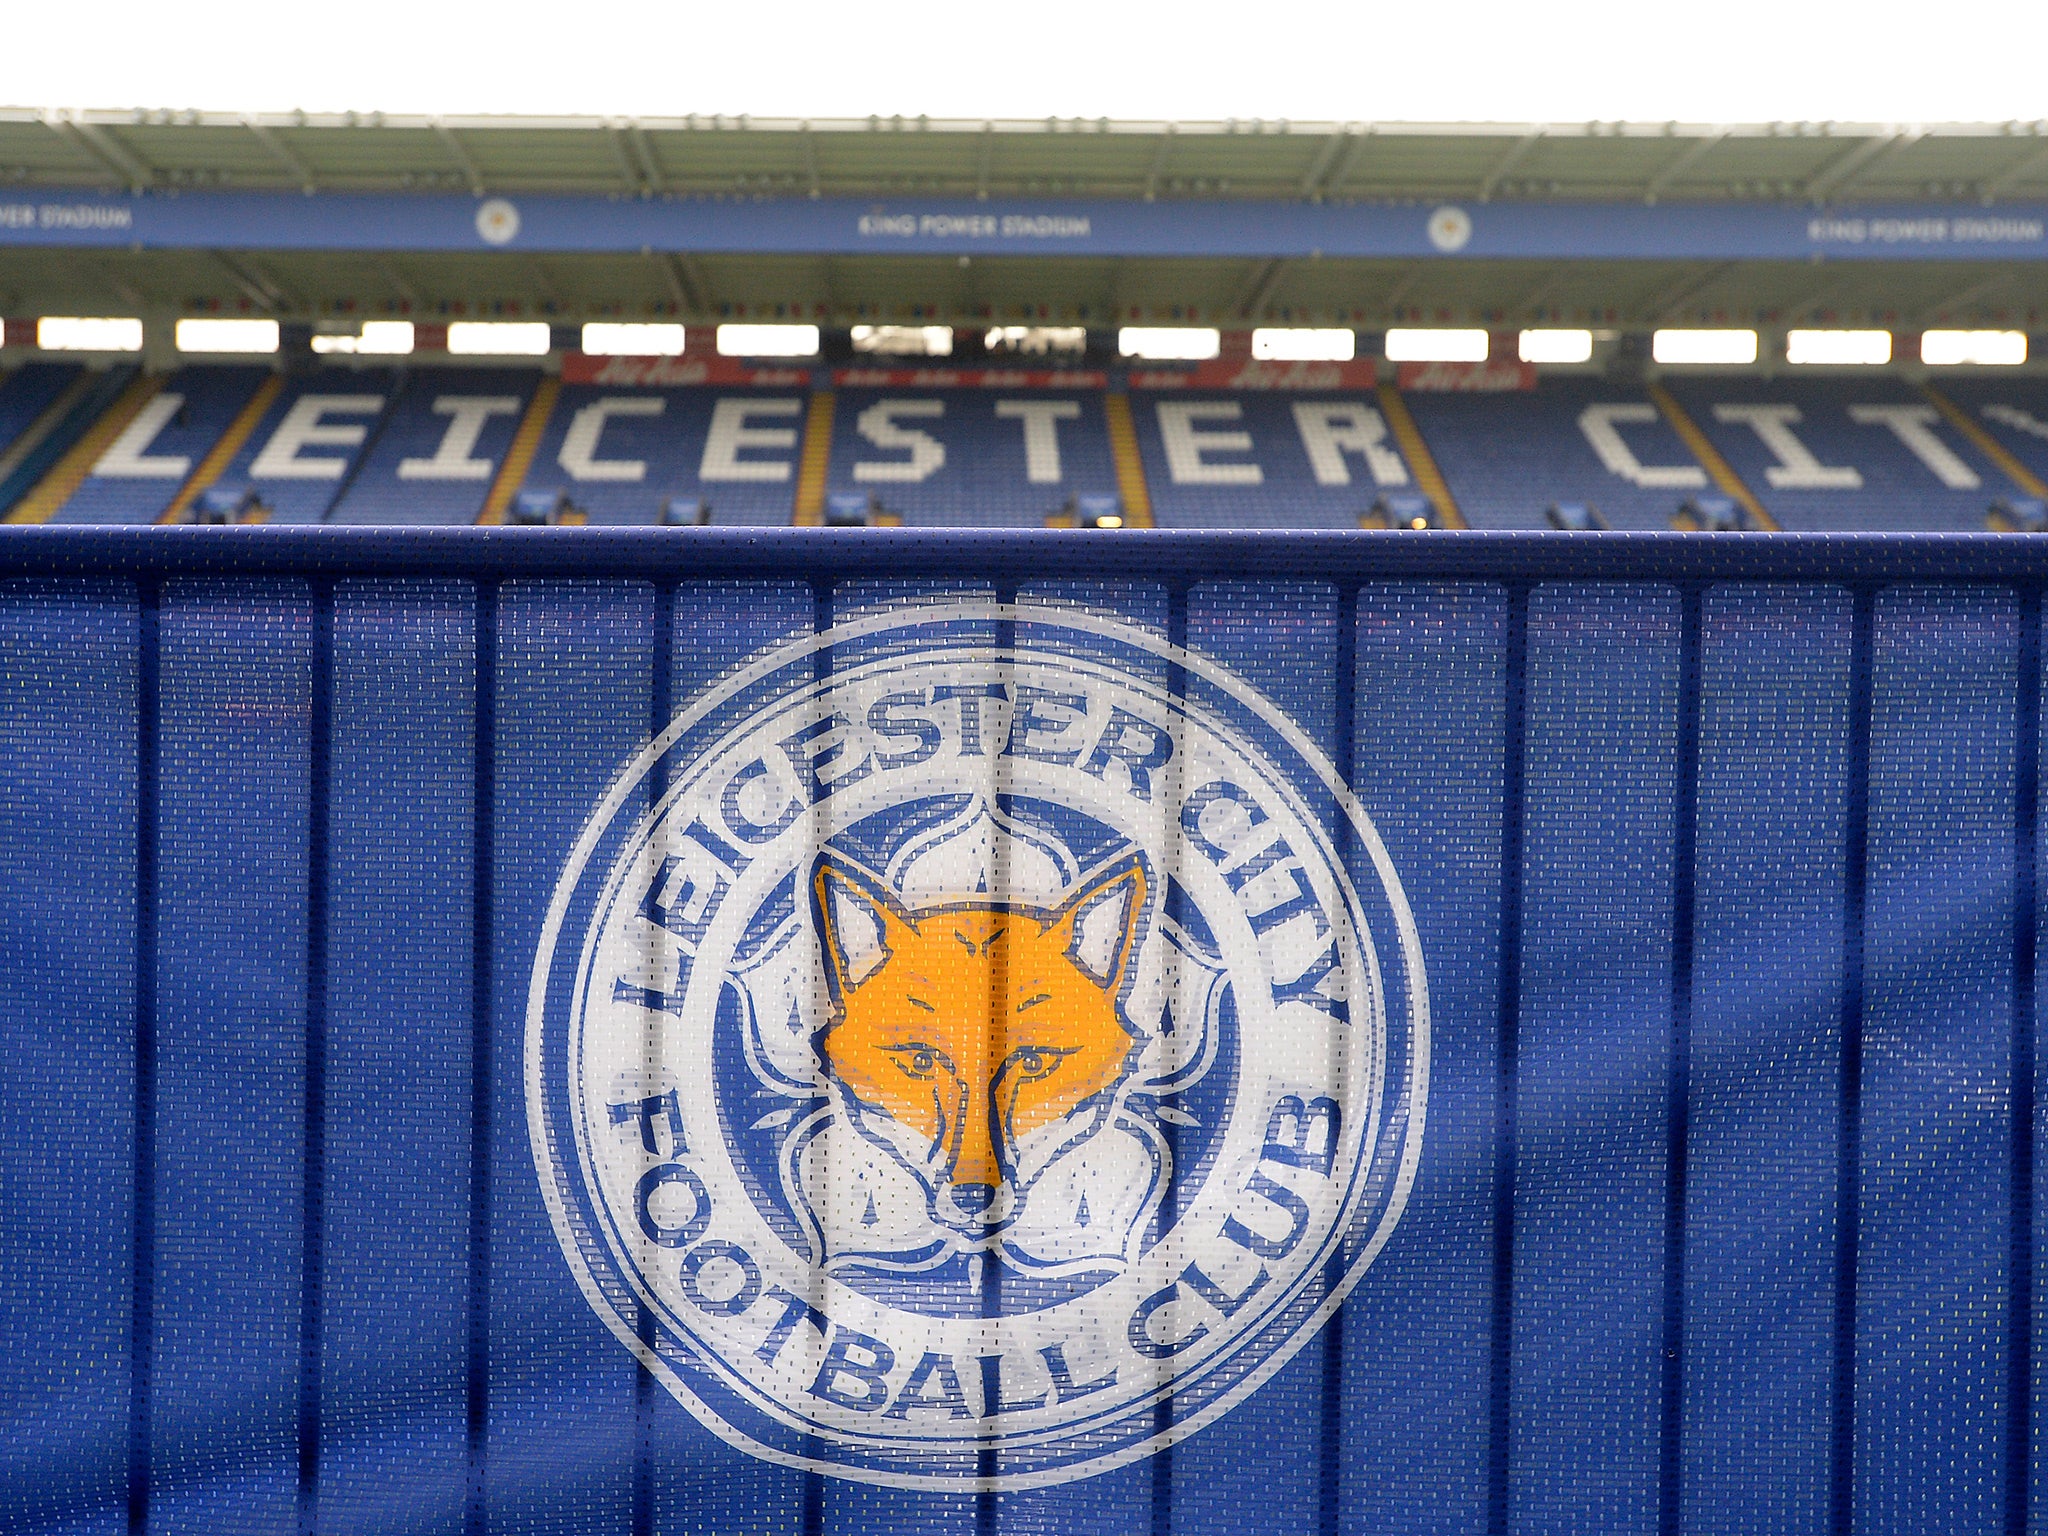 Leicester ejected several fans from the King Power Stadium for homophobic chants